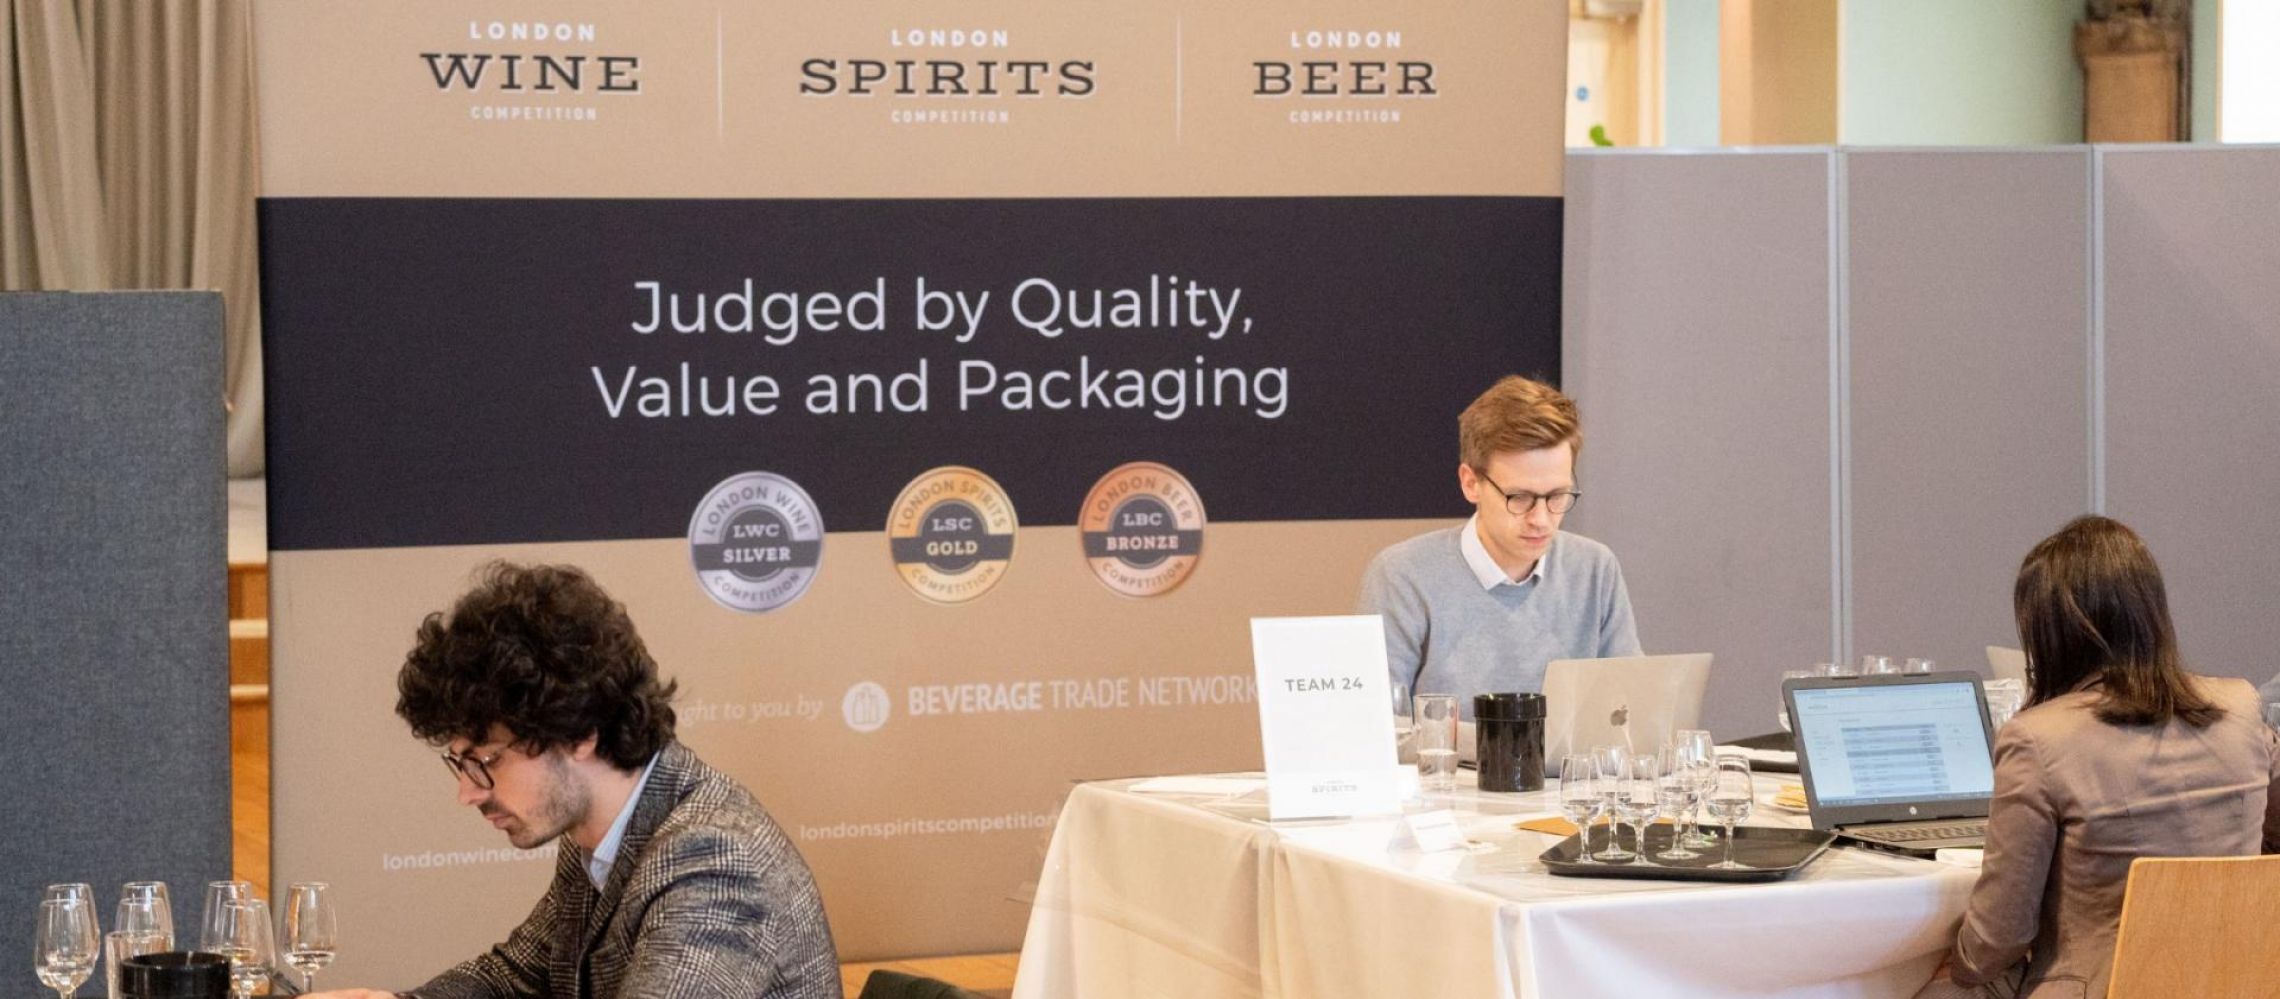 Photo for: Why enter London Wine, Beer, and Spirits Competitions